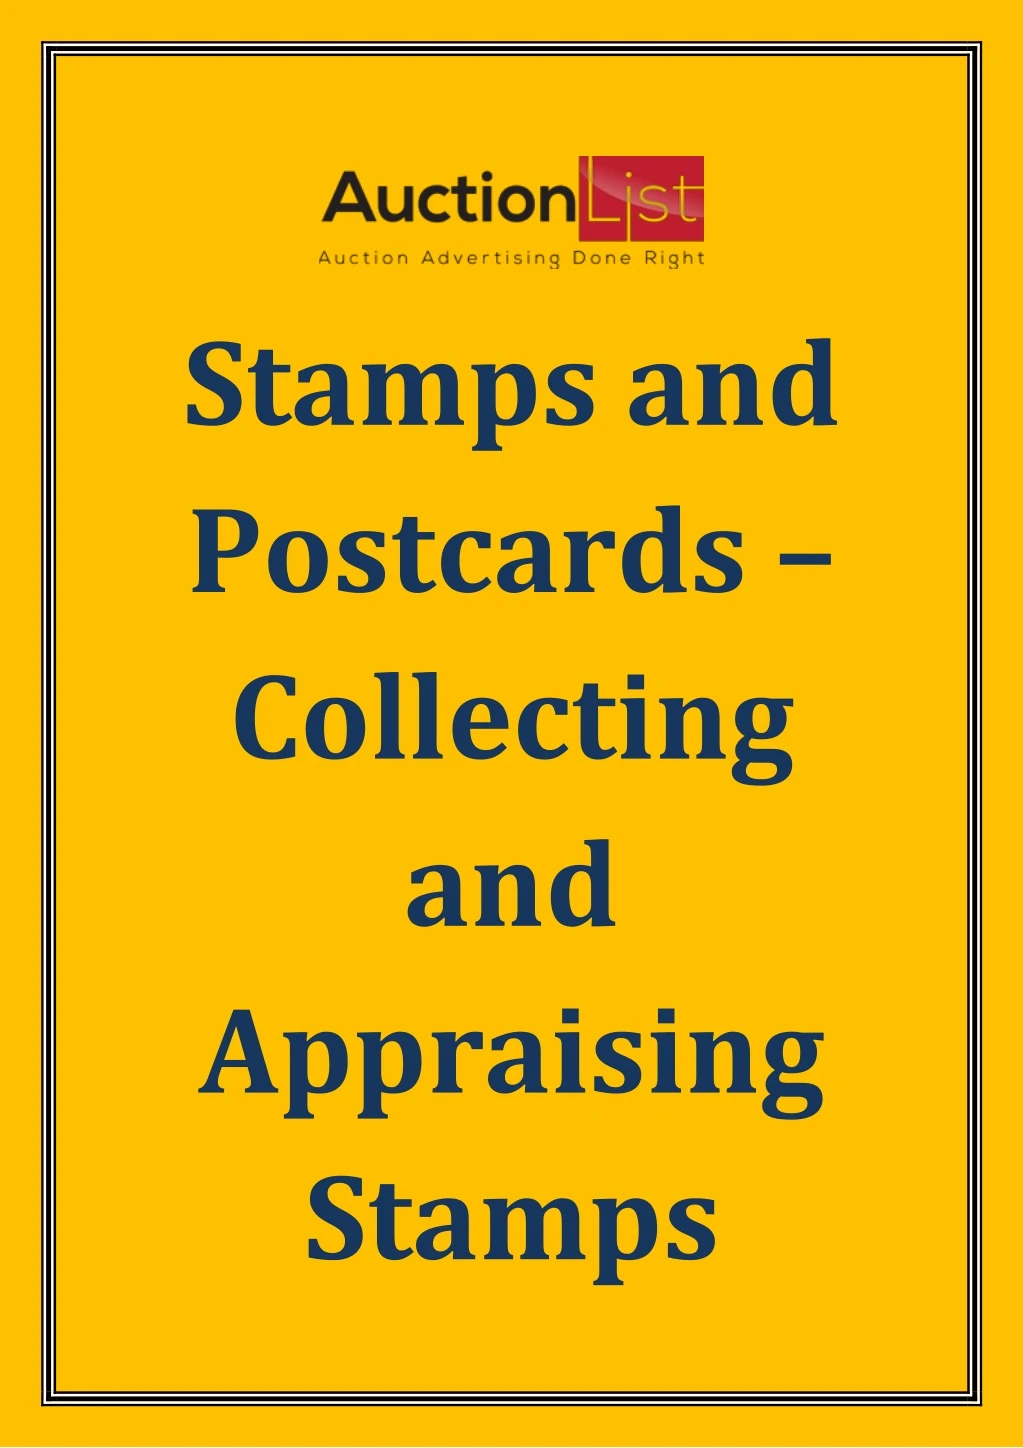 stamps and postcards collecting and appraising